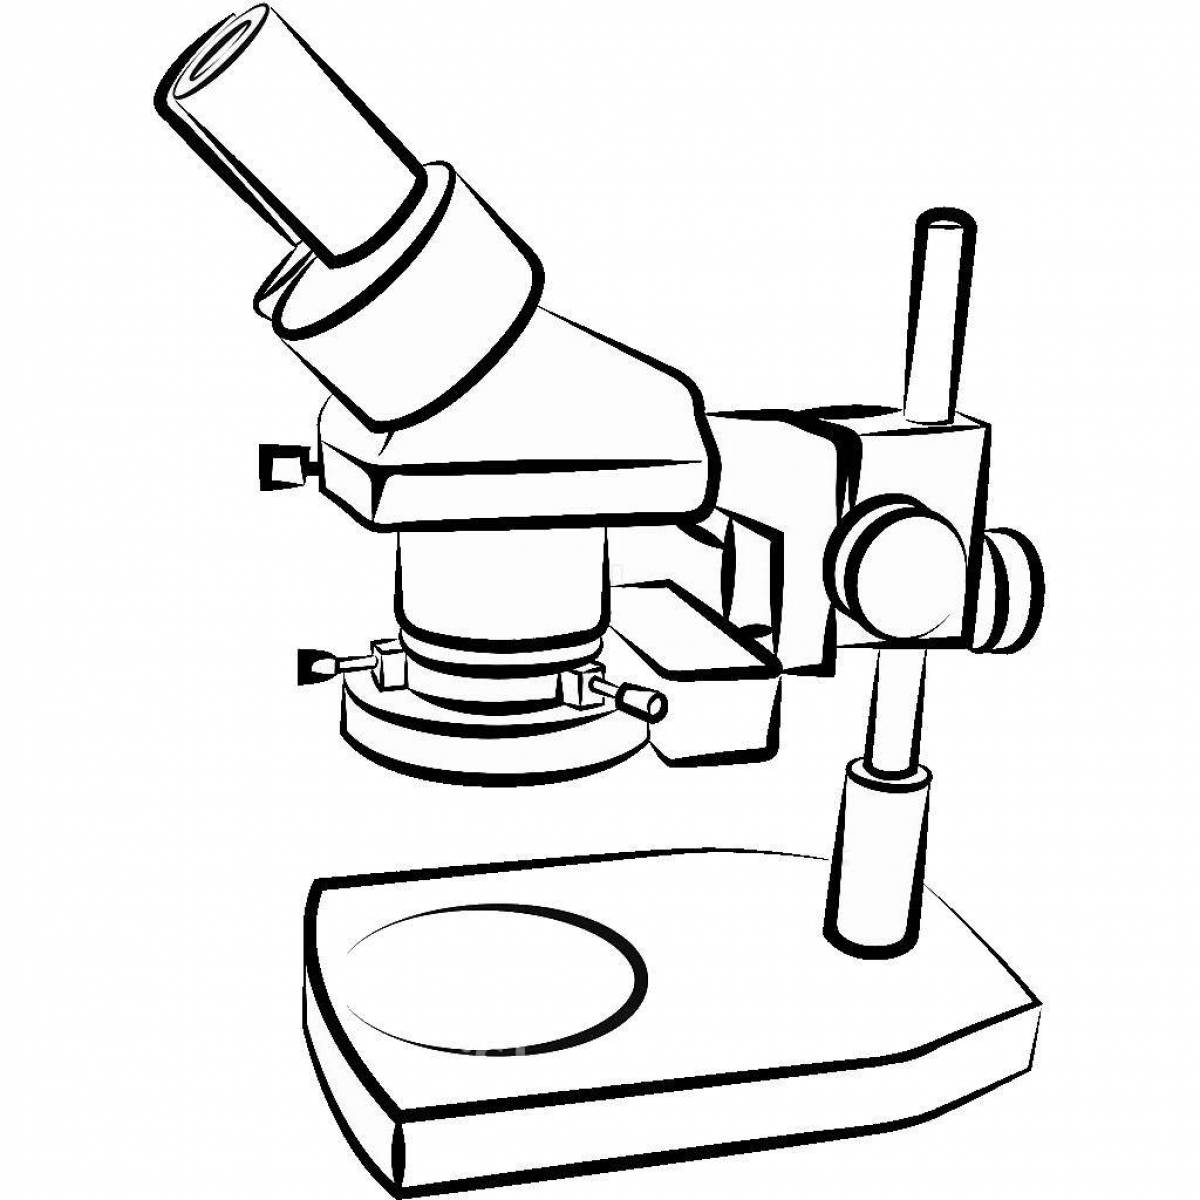 Colorful microscope coloring page for kids